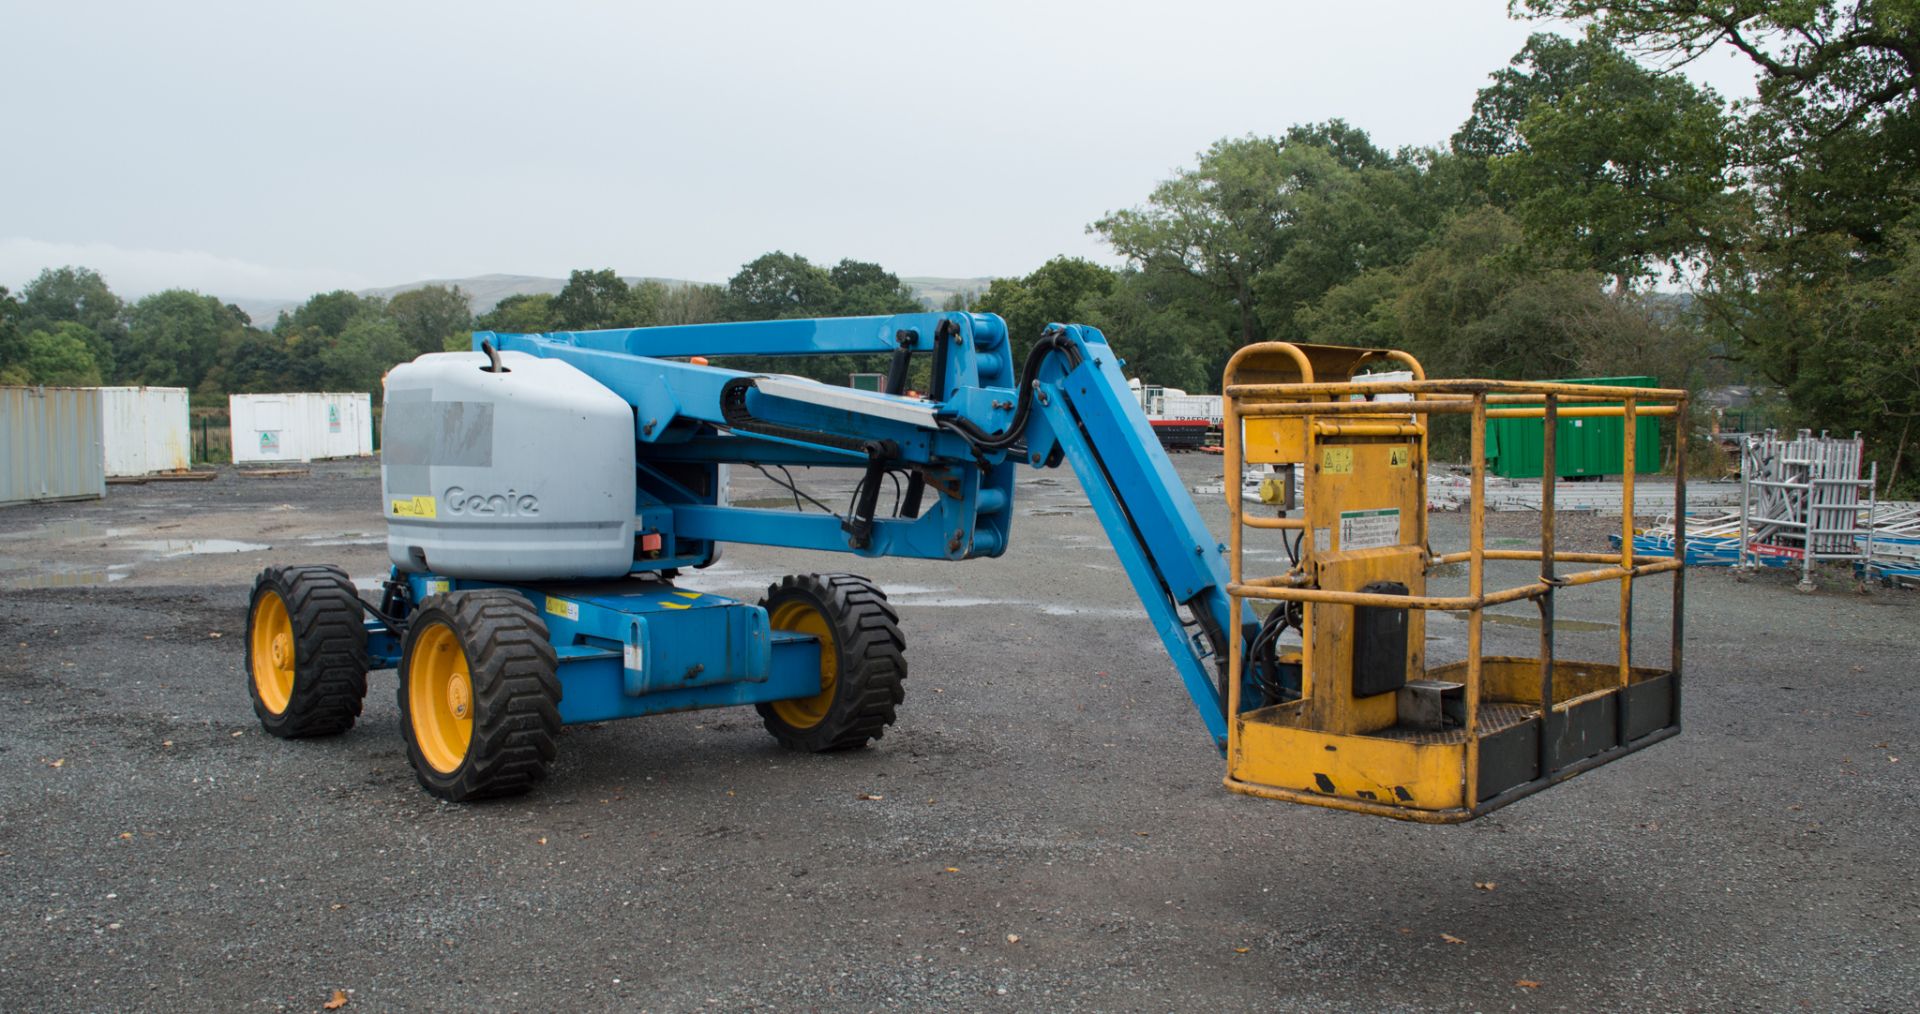 Genie Z-45/25 45 foot diesel driven 4WD articulated boom lift Year: 2011 S/N: 11B-1672 Recorded - Image 4 of 15